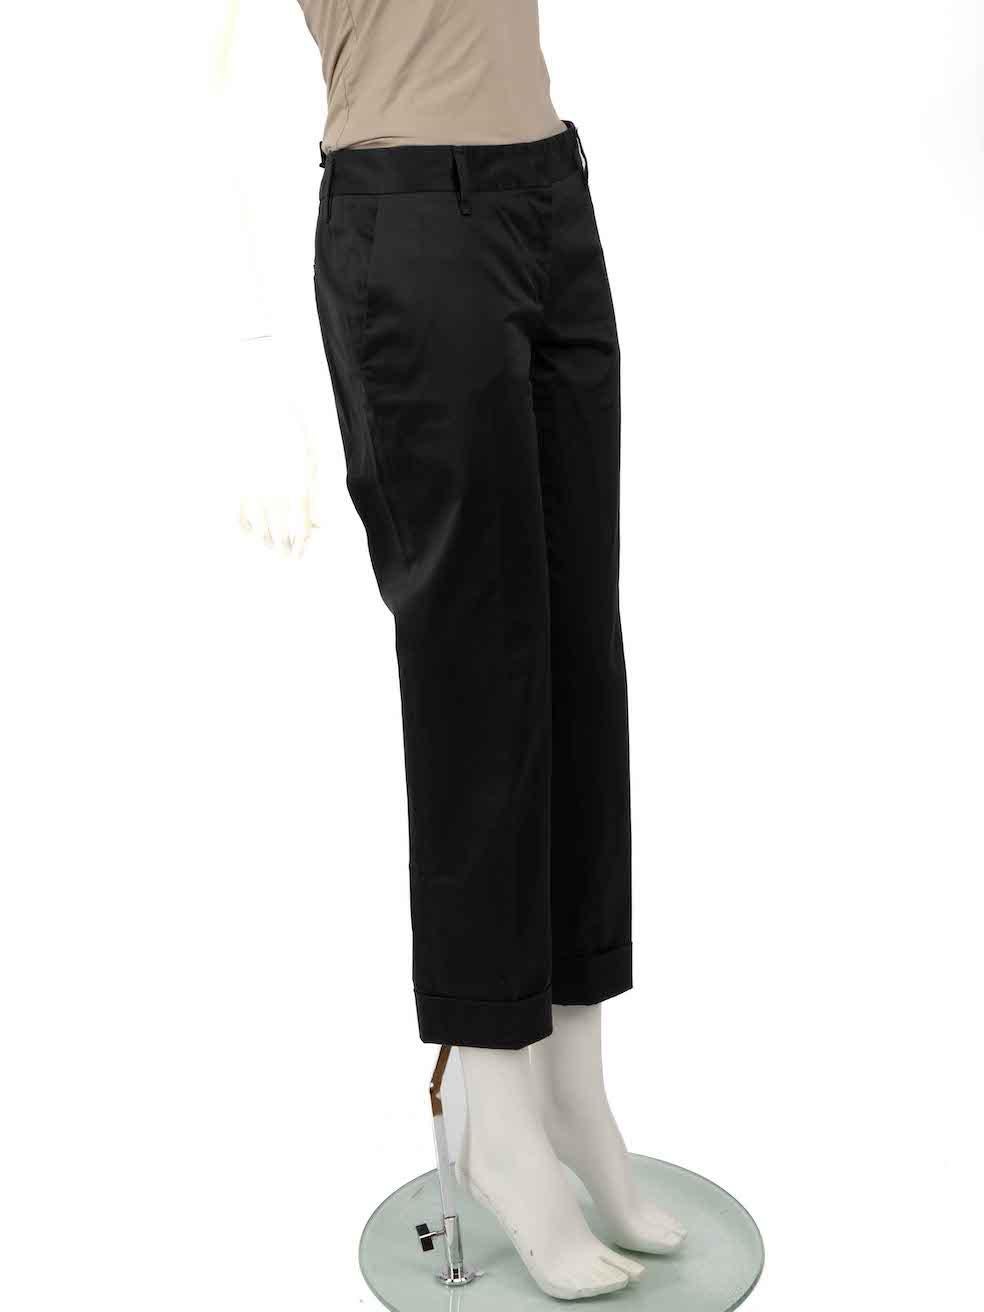 CONDITION is Very good. Minimal wear to trousers is evident. Minimal wear to the front left leg where some small discolouration can be seen on this used Prada designer resale item.
 
 
 
 Details
 
 
 Black
 
 Cotton
 
 Trousers
 
 Straight leg
 
